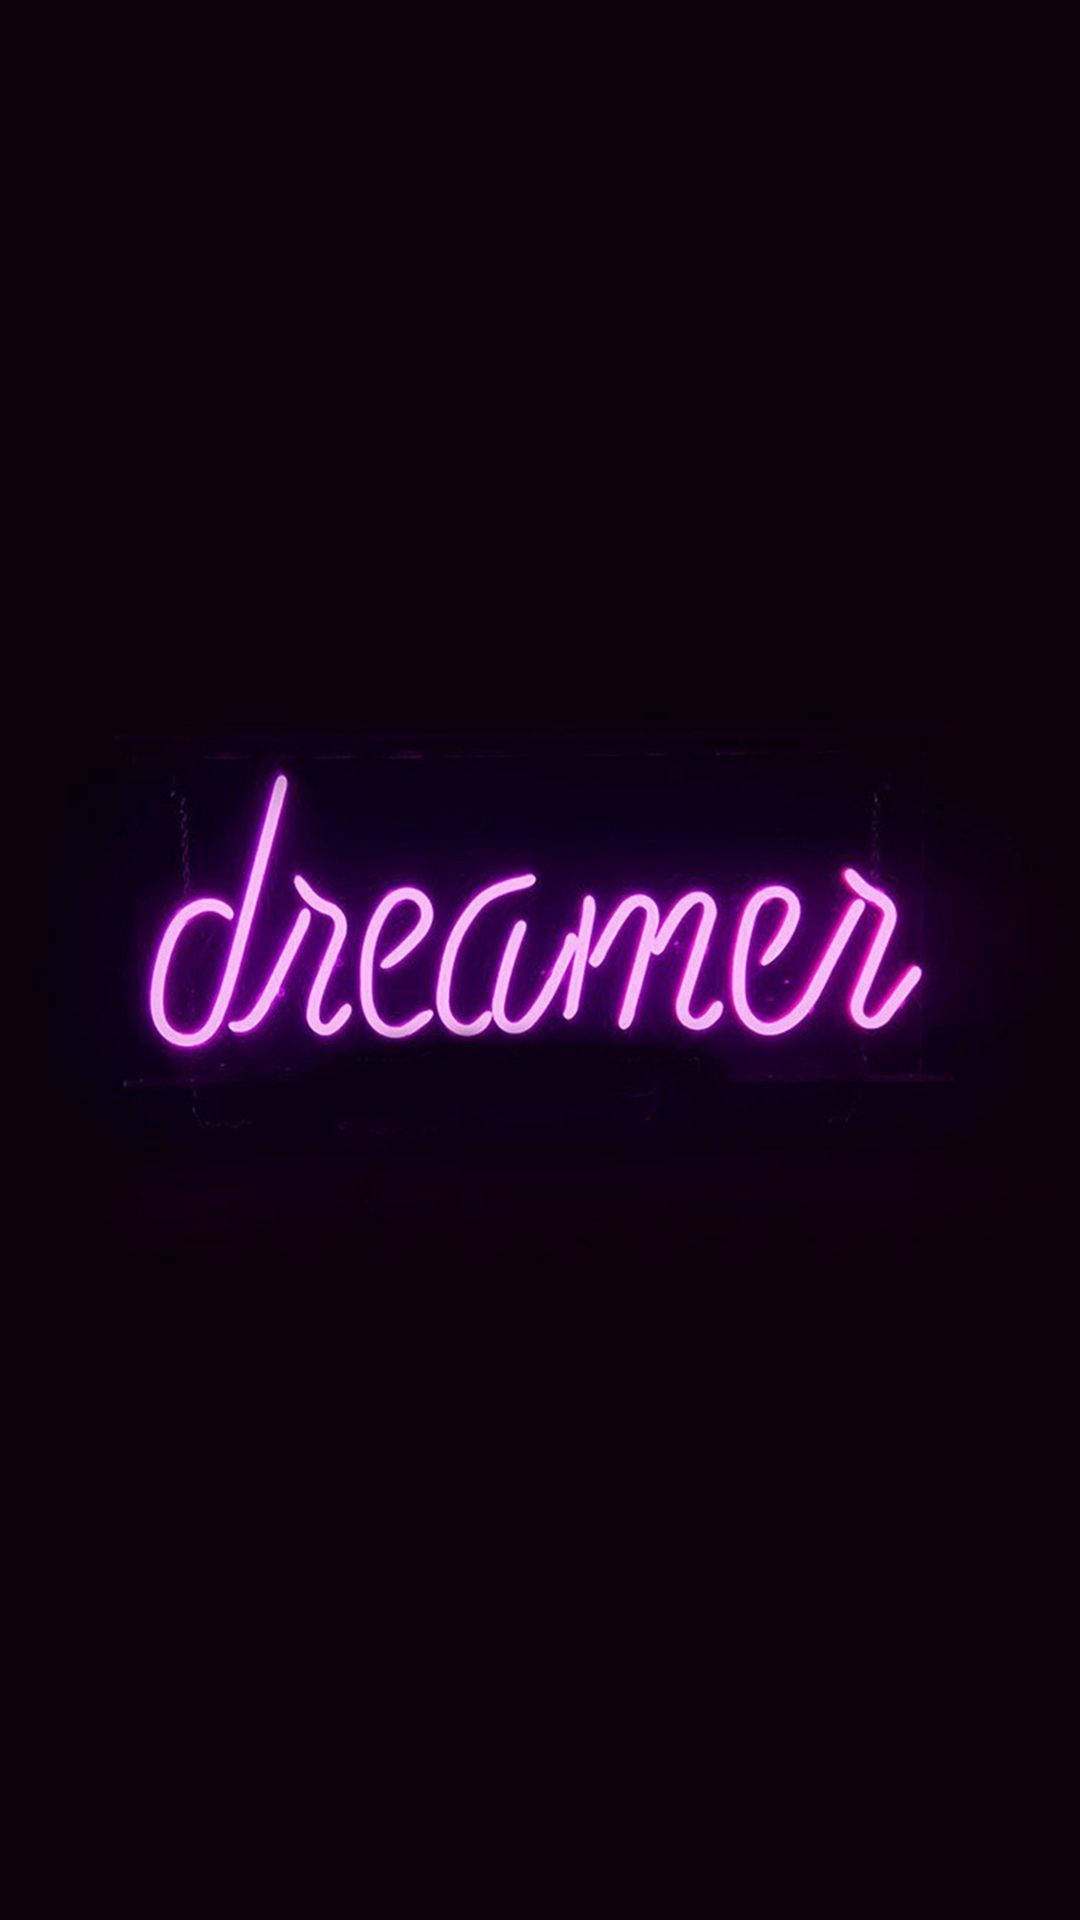 Dreamer Black And Purple Aesthetic Background